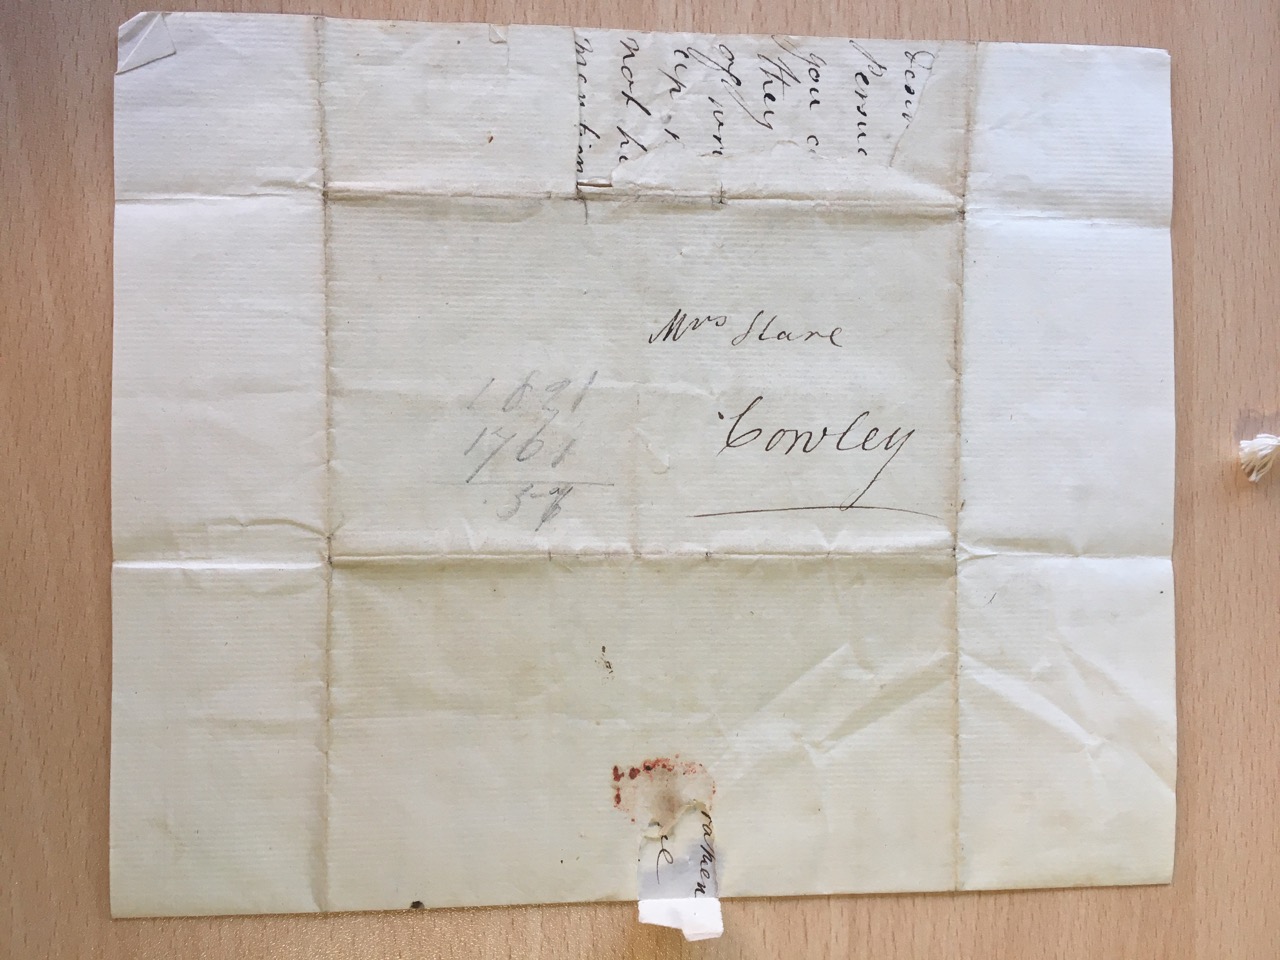 Image #4 of letter: M[ary?] Burton to Ann Hare, c1789-98